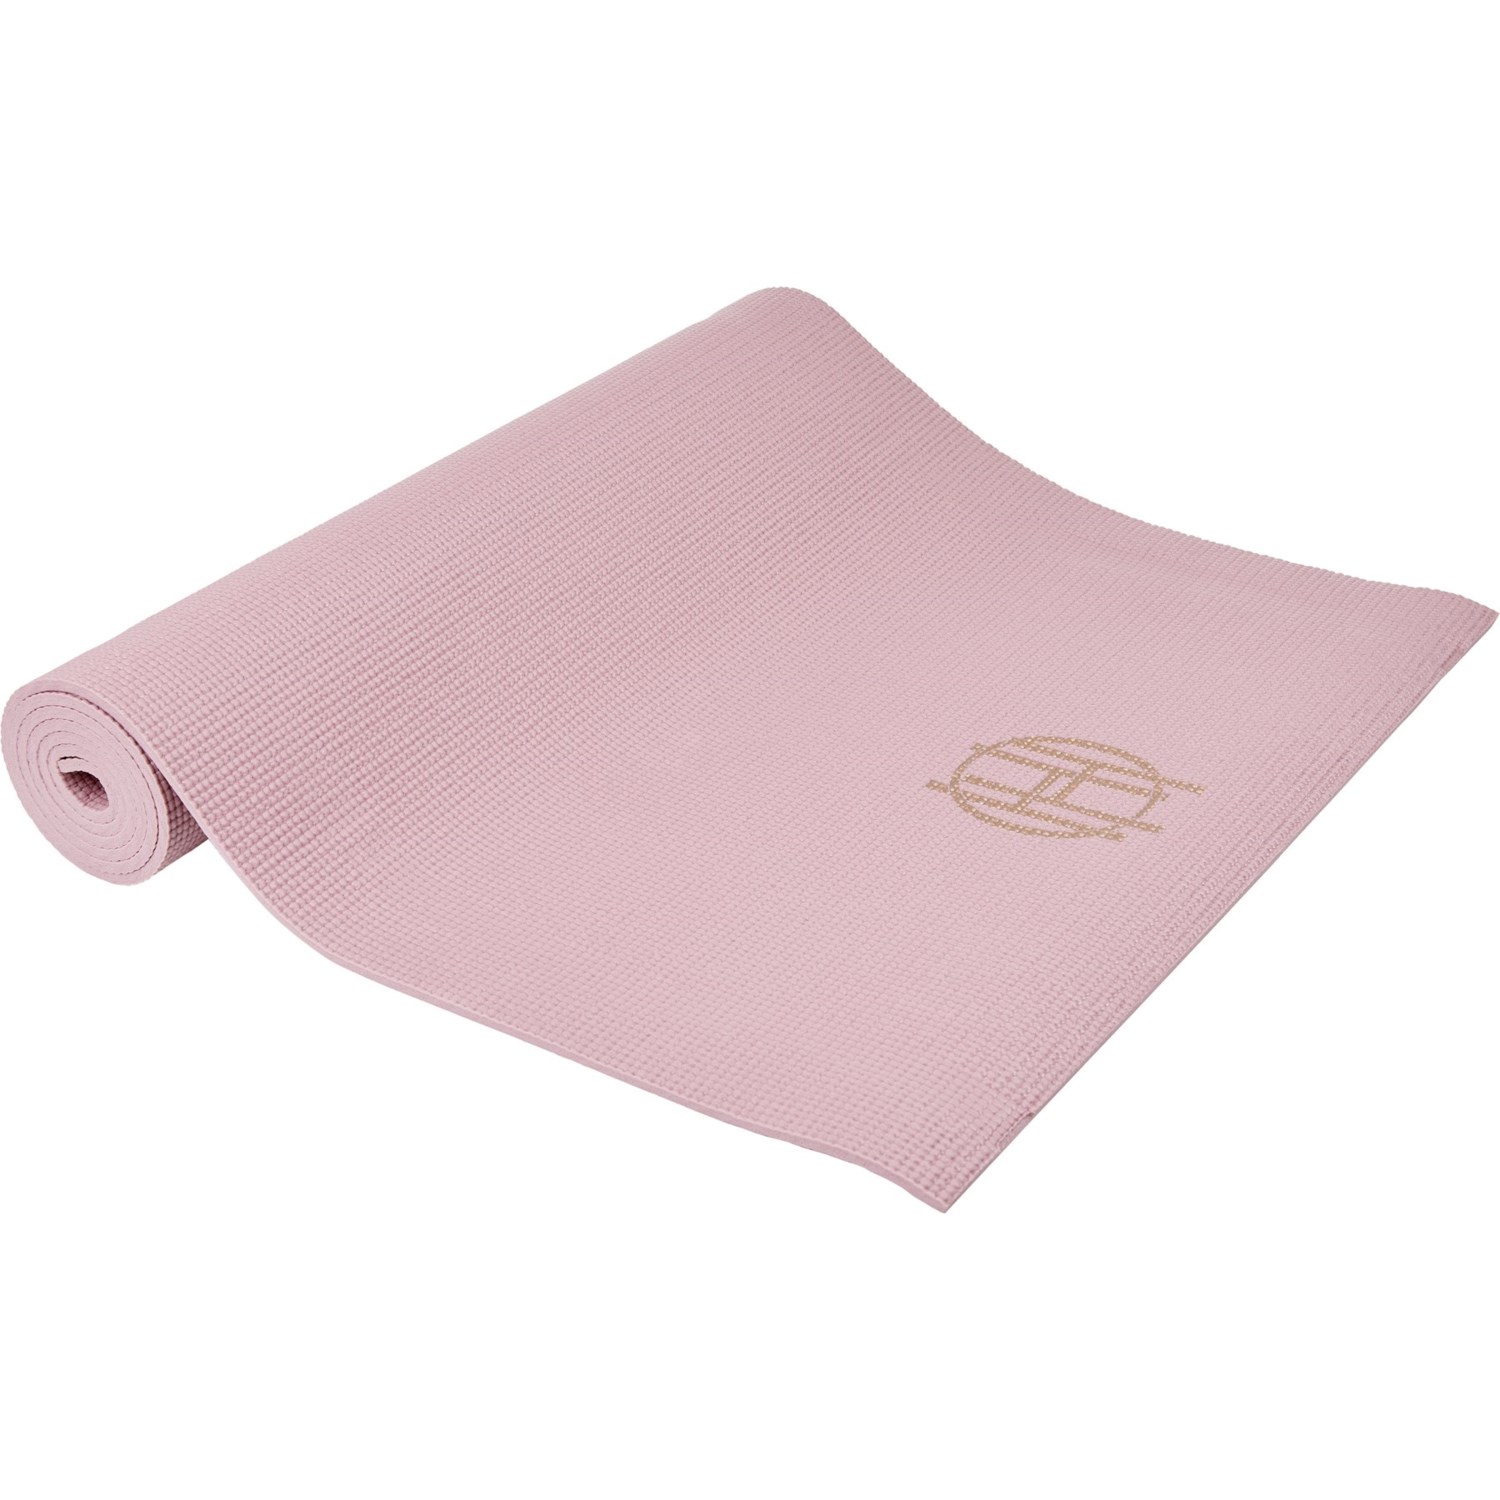 House of Harlow 1960 Solid Yoga Mat - 68x24”, 6 mm